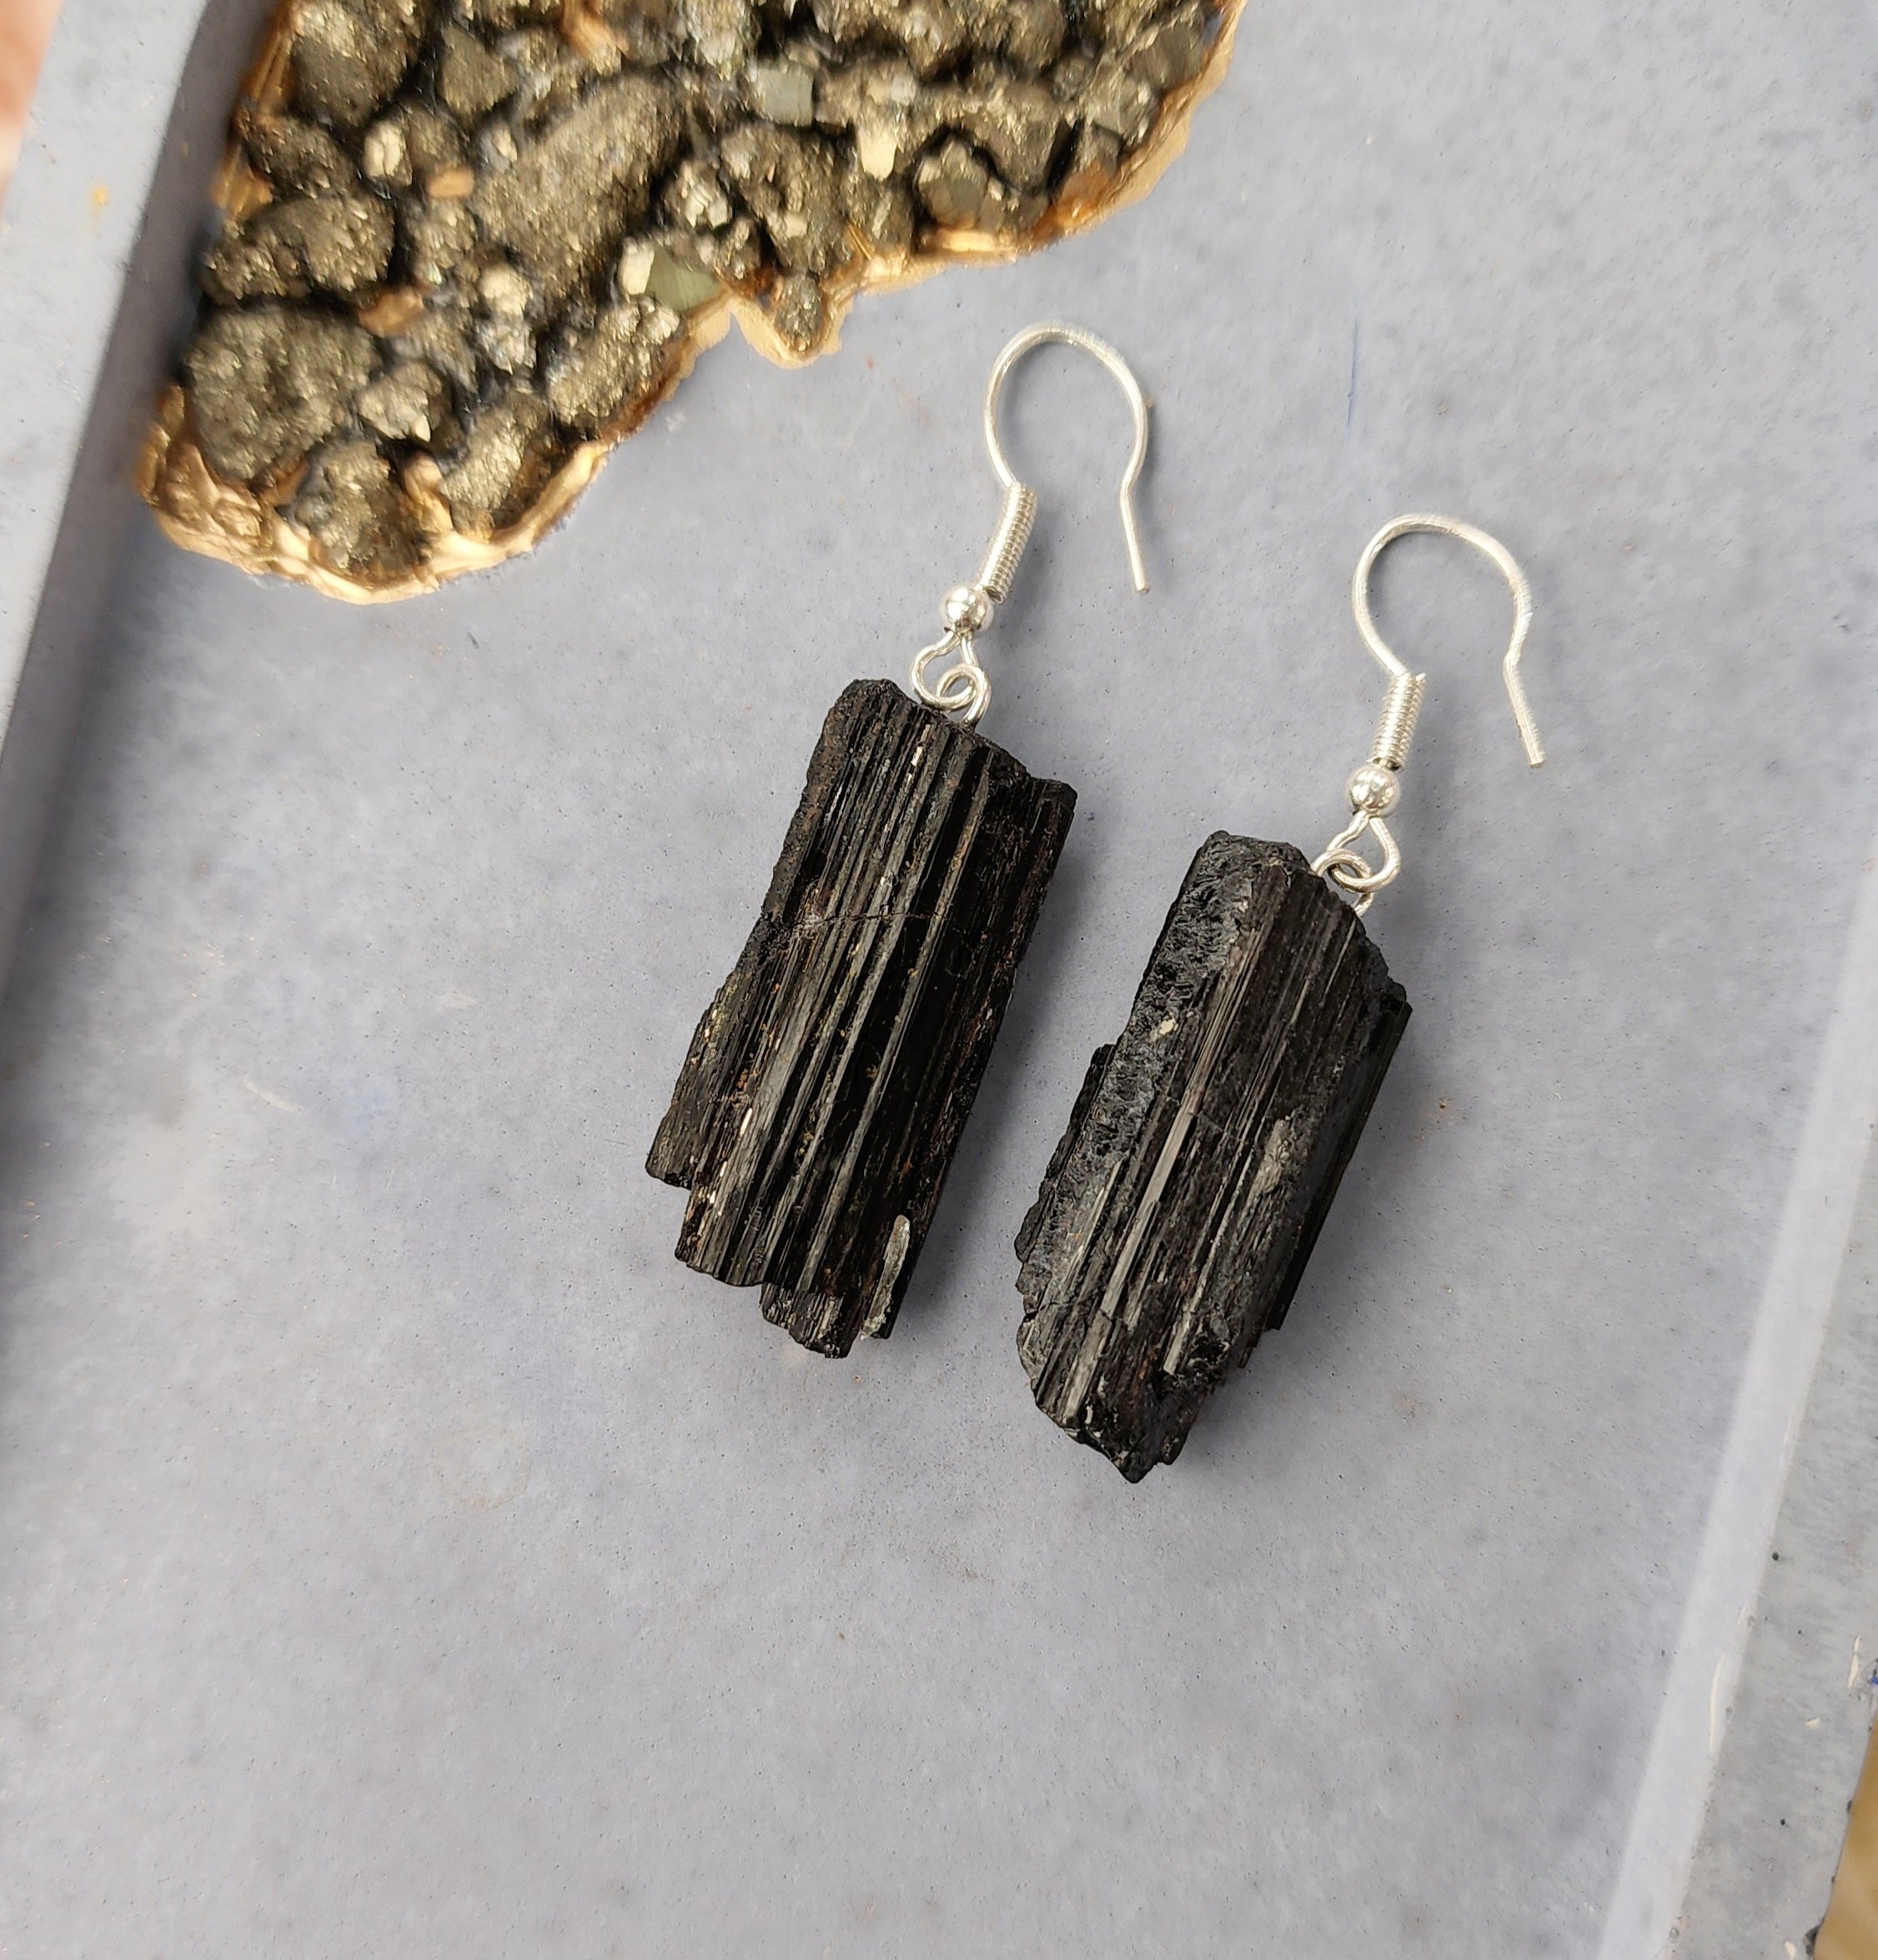 Black Tourmaline Earrings for Protection